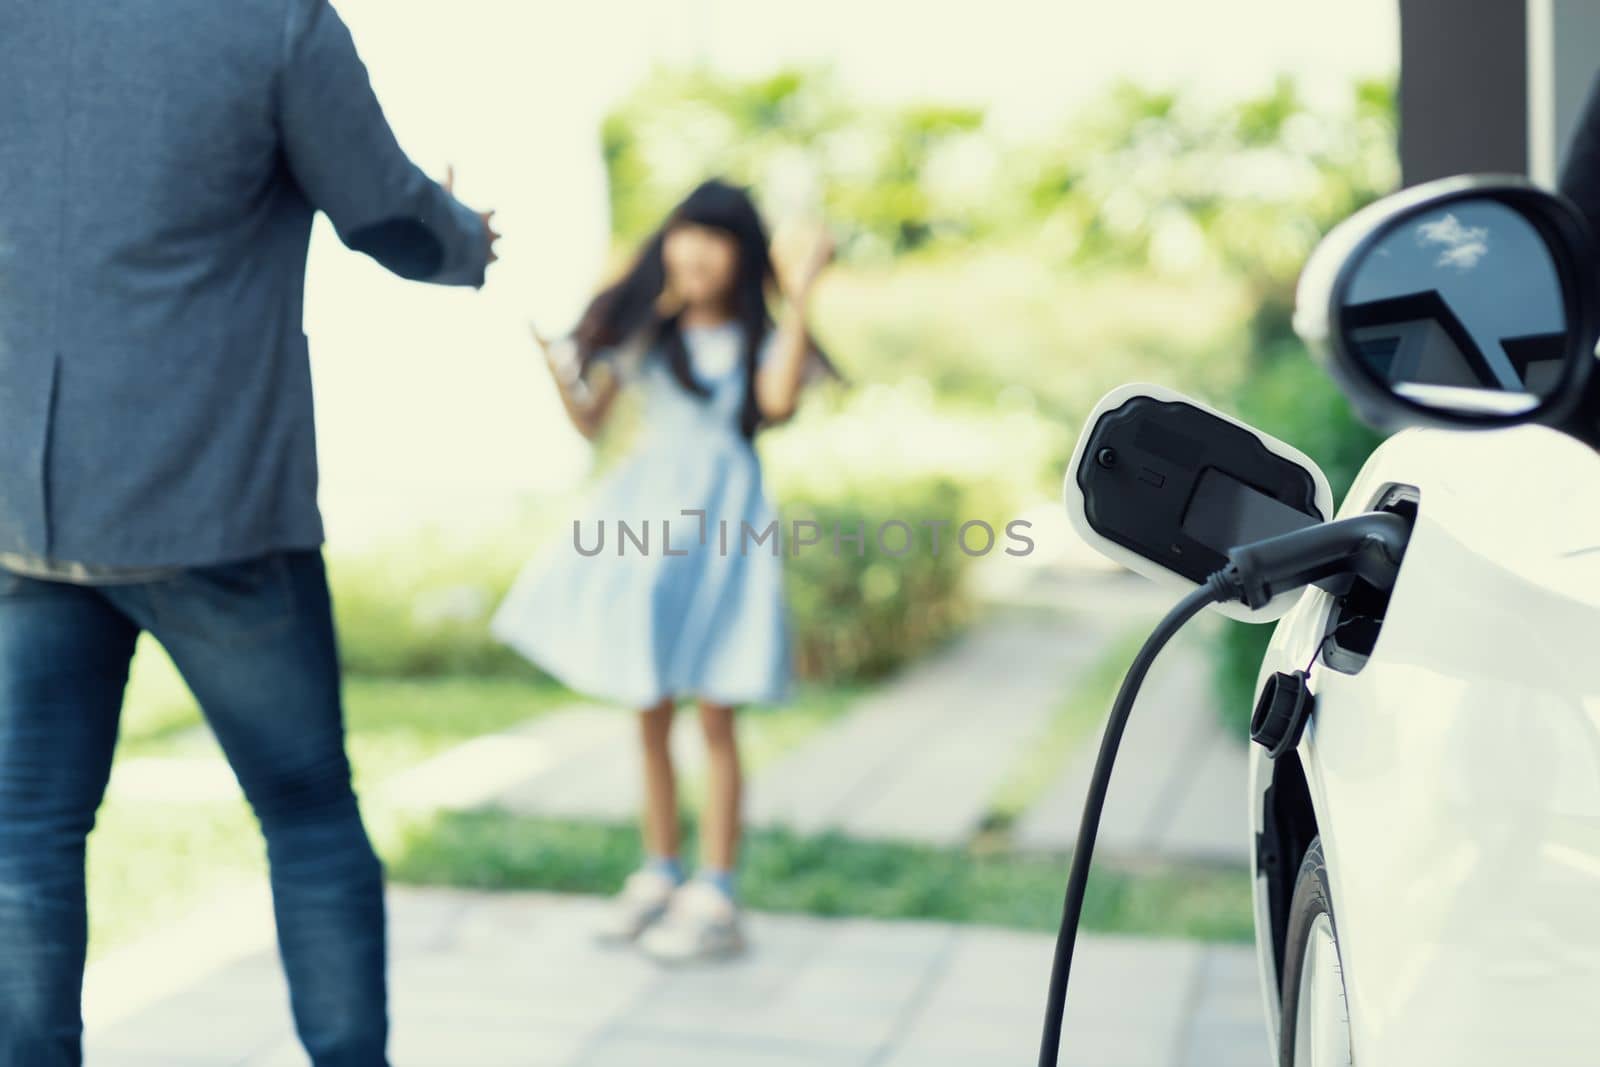 Progressive father and daughter plugs EV charger from home charging station to electric vehicle. Future eco-friendly car with EV cars powered by renewable source of clean energy.